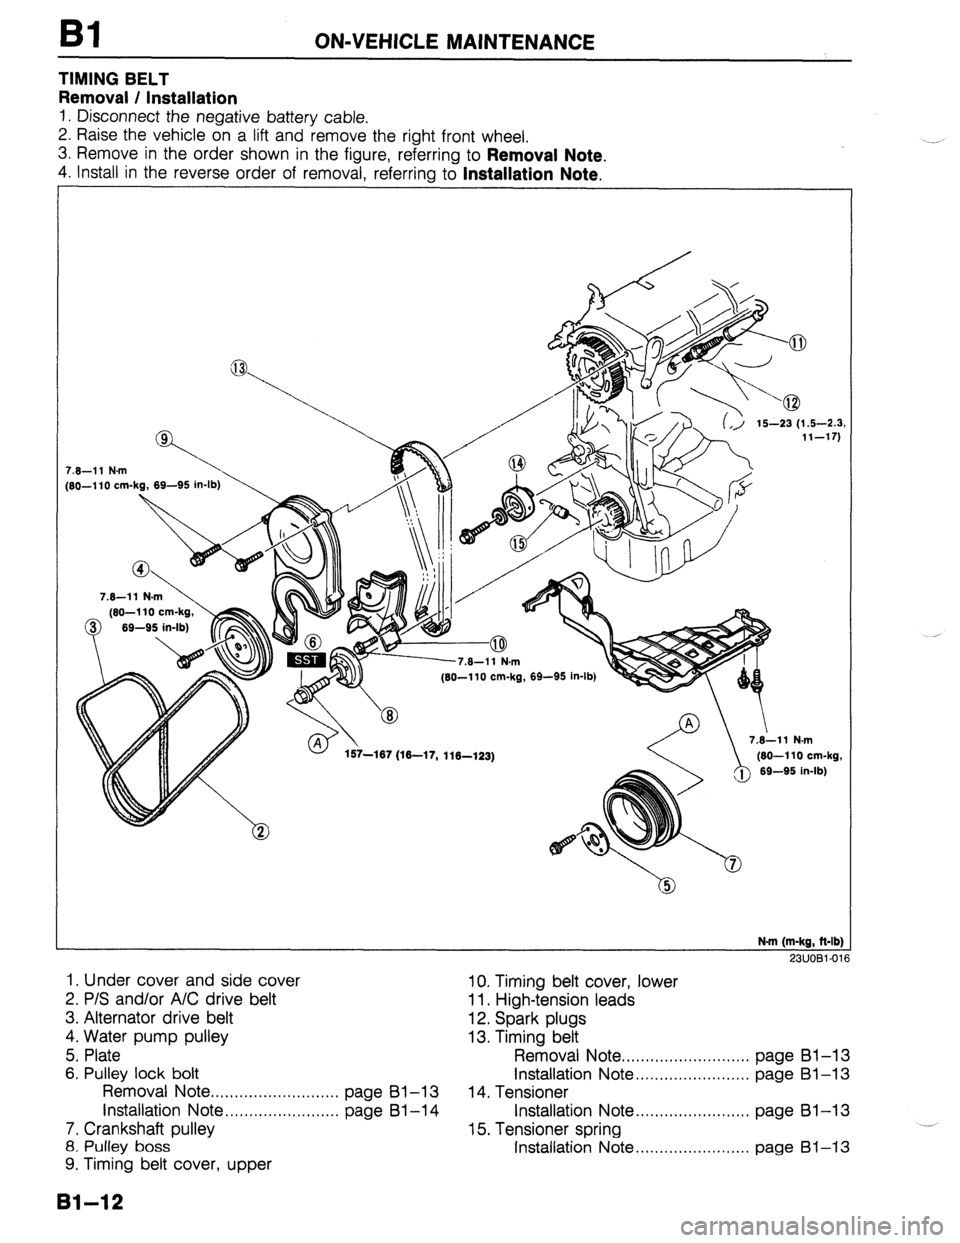 MAZDA PROTEGE 1992 Service Manual Bl ON-VEHICLE MAINTENANCE 
TIMING BELT 
Removal / Installation 
1. Disconnect the negative battery cable. 
2. Raise the vehicle on a lift and remove the right front wheel. 
3. Remove in the order show